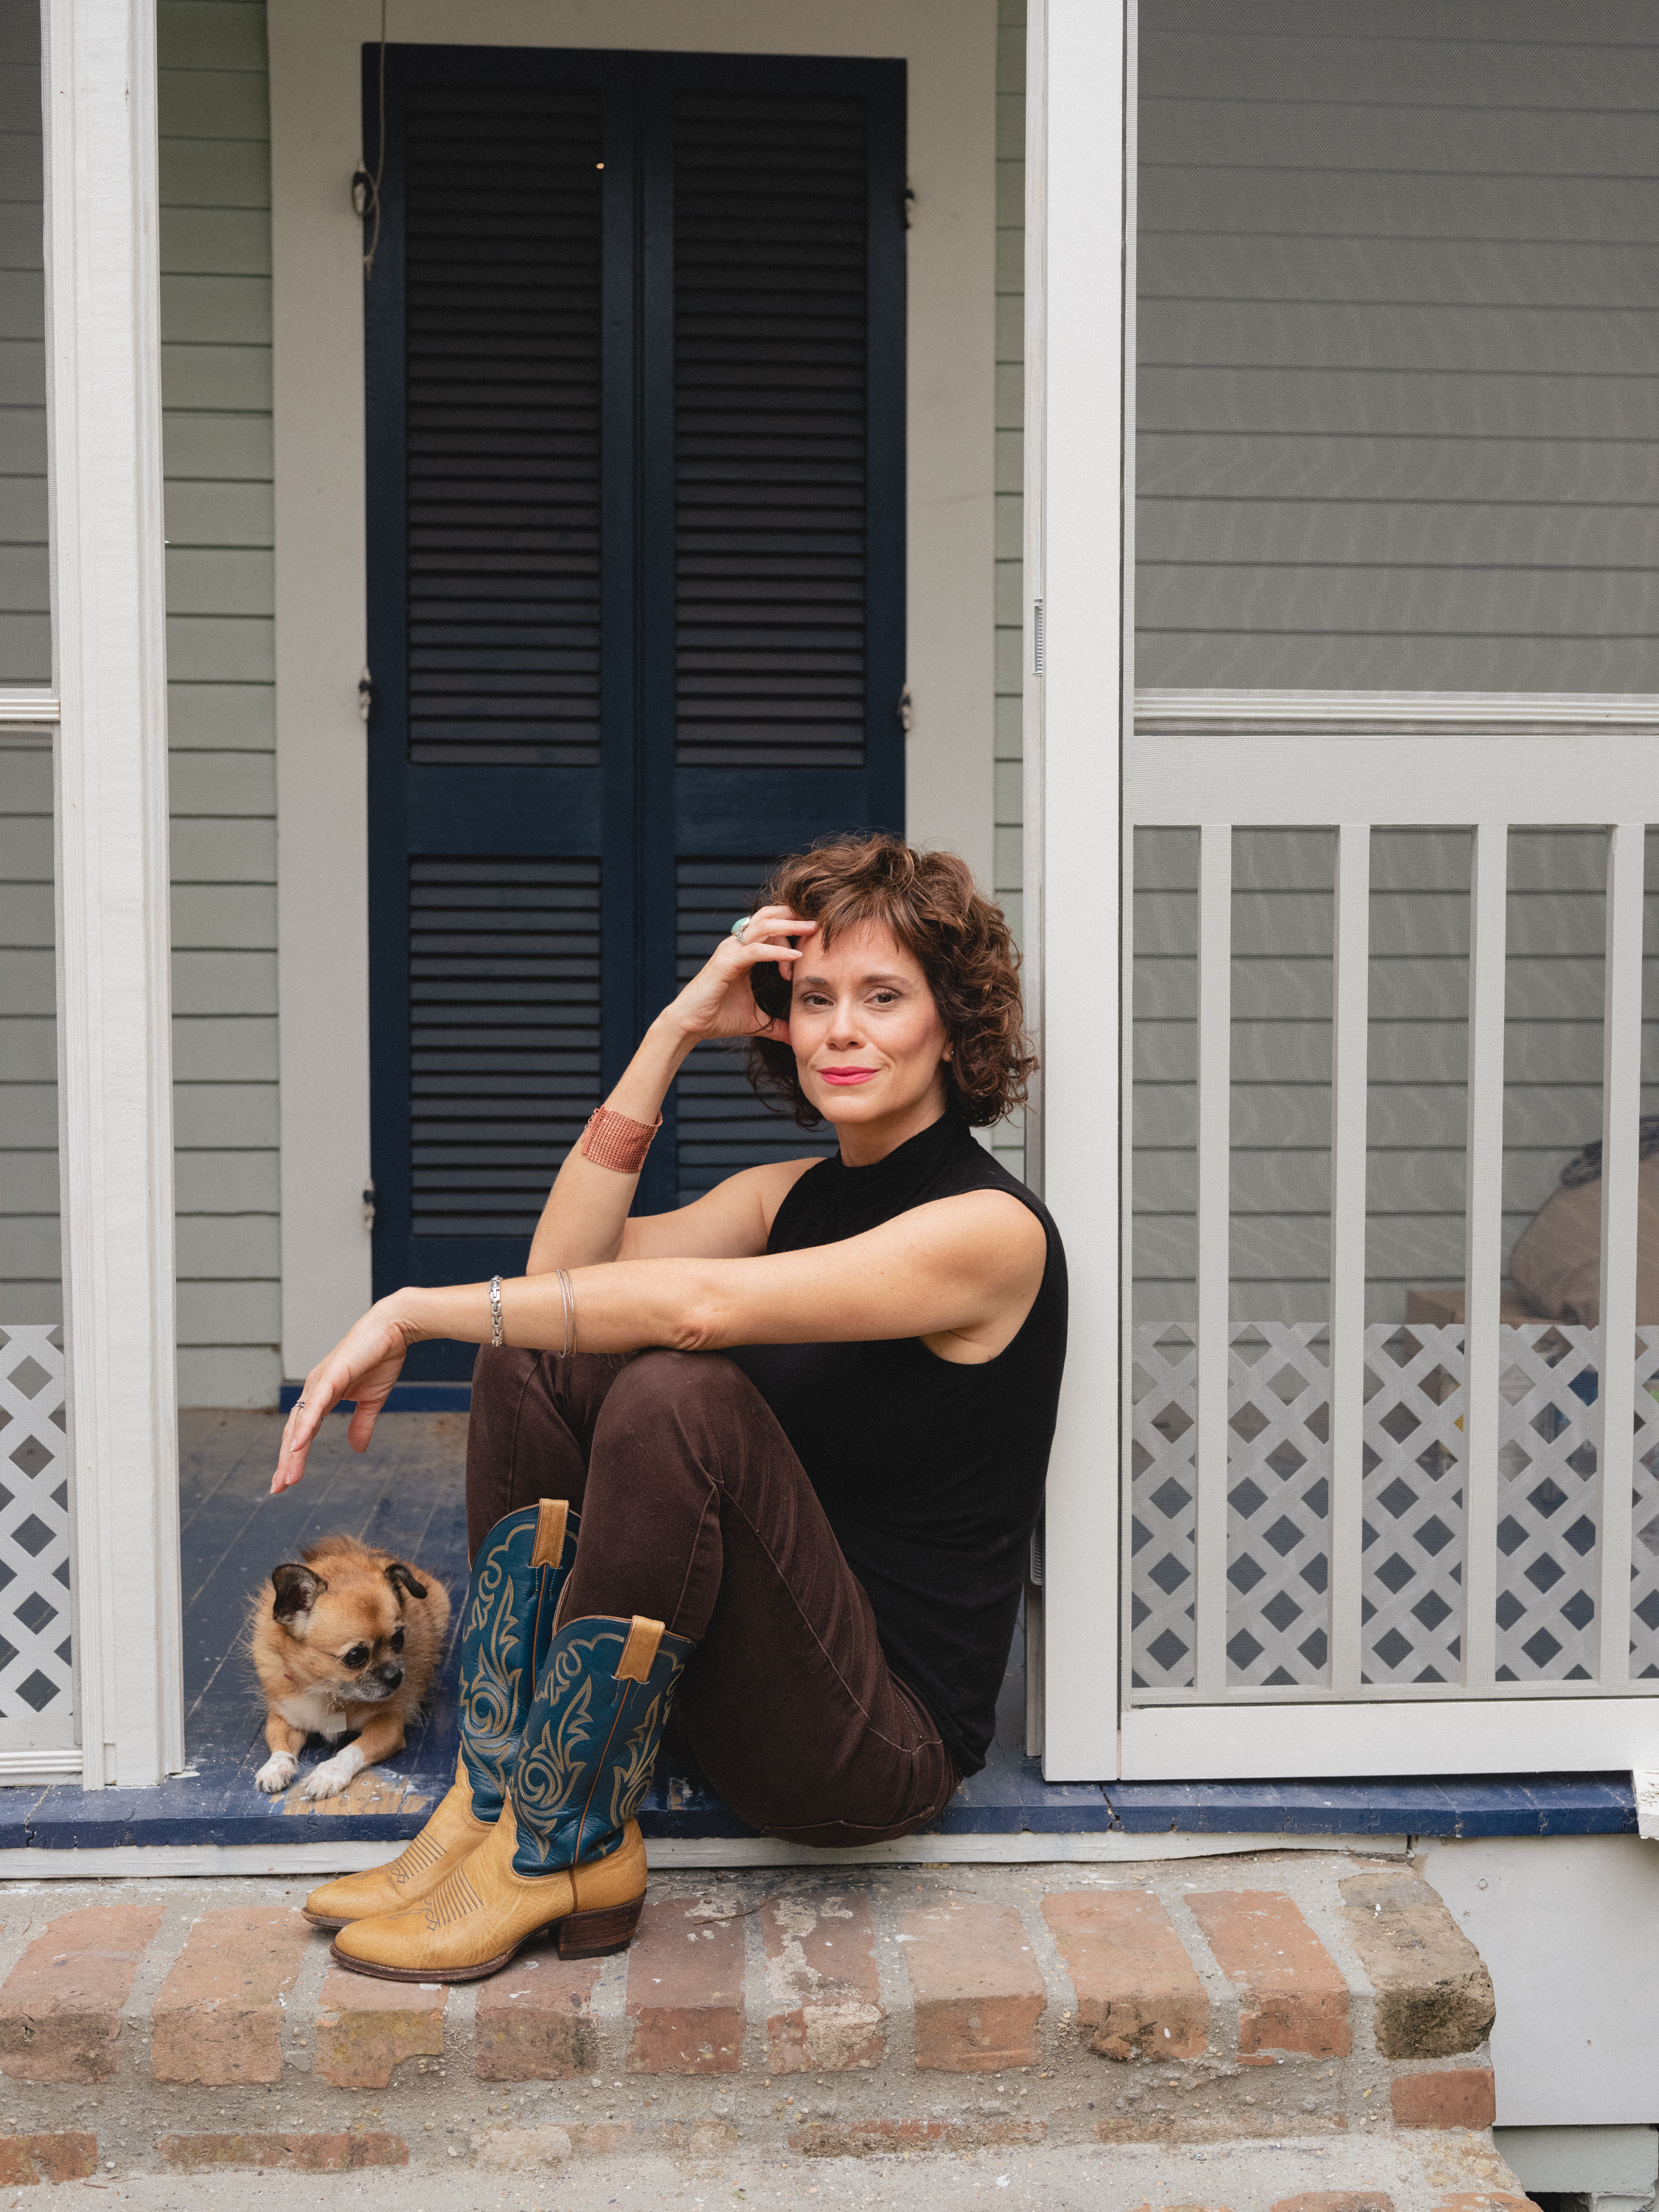 Fair-skinned woman with dark blond hair sits on a porch beside a small dog..